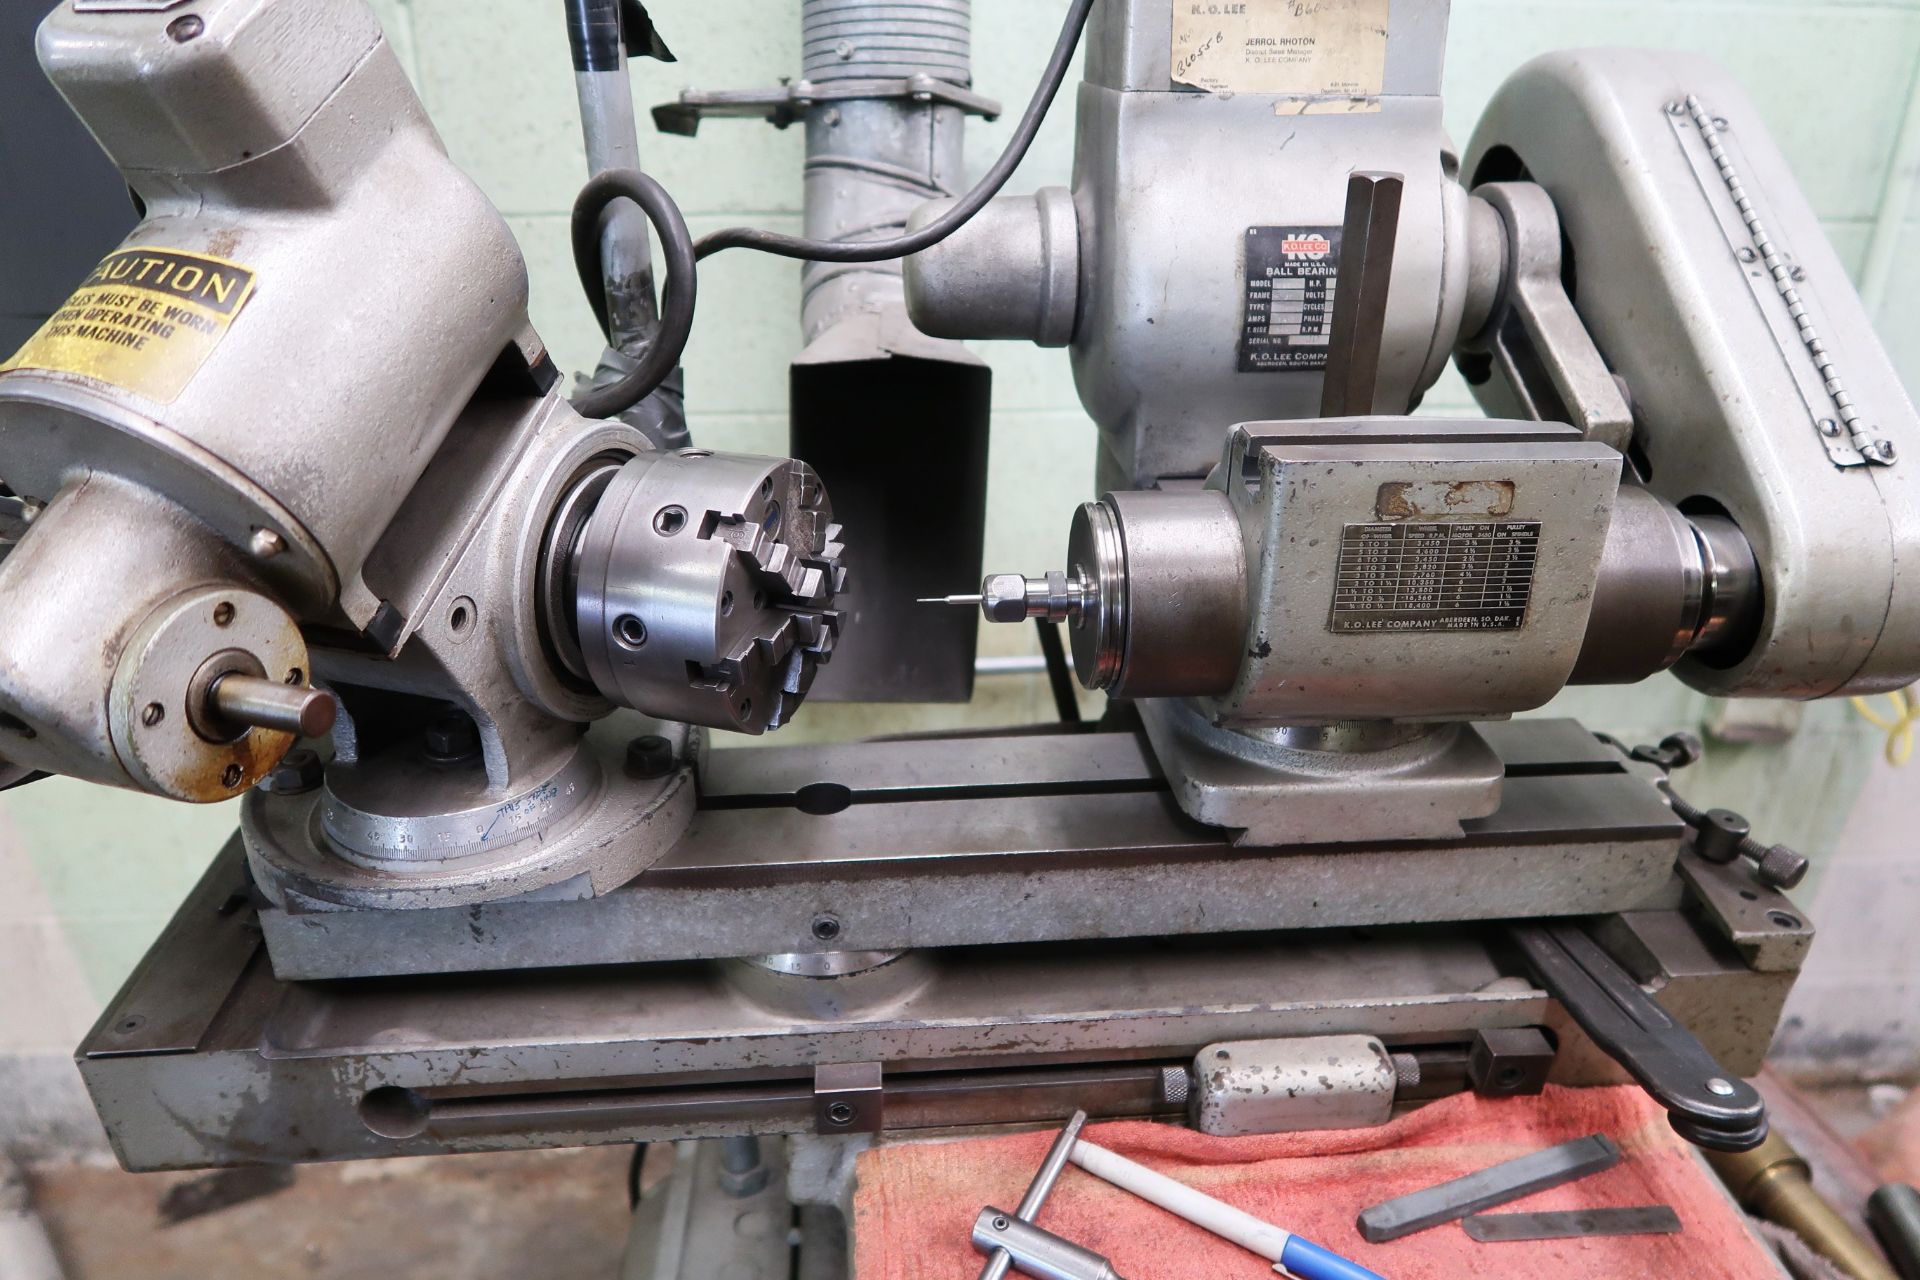 Ko Lee Model B360 Tool And Cutter Grinder With Motorized Work Head - Image 2 of 3